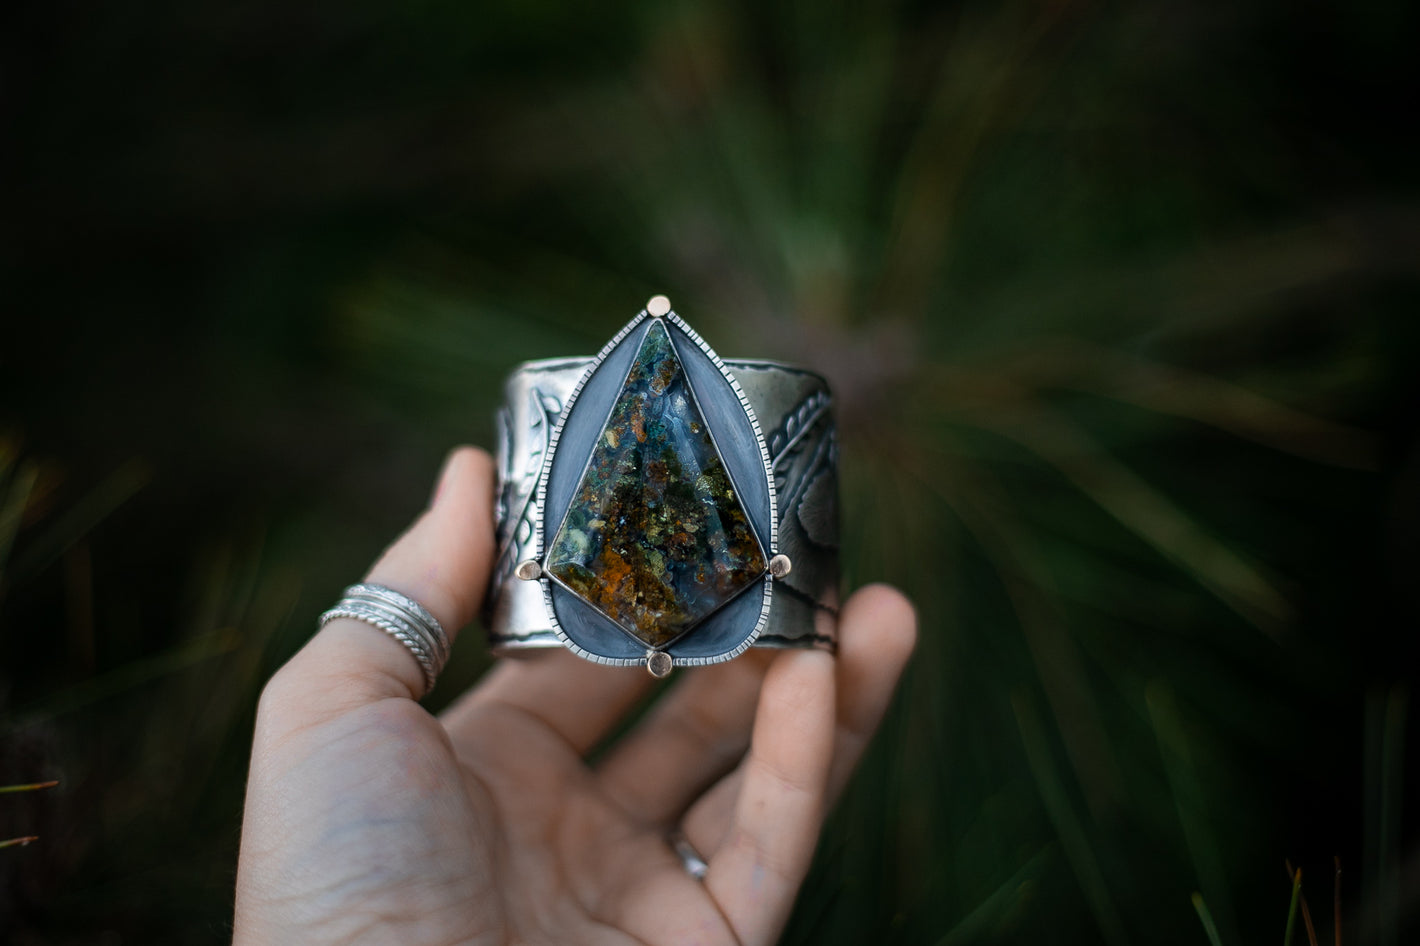 Large kite shaped Moss Agate set in a large sterling silver cuff with recycled 14K gold ball accents being held up by the artist's hand.  